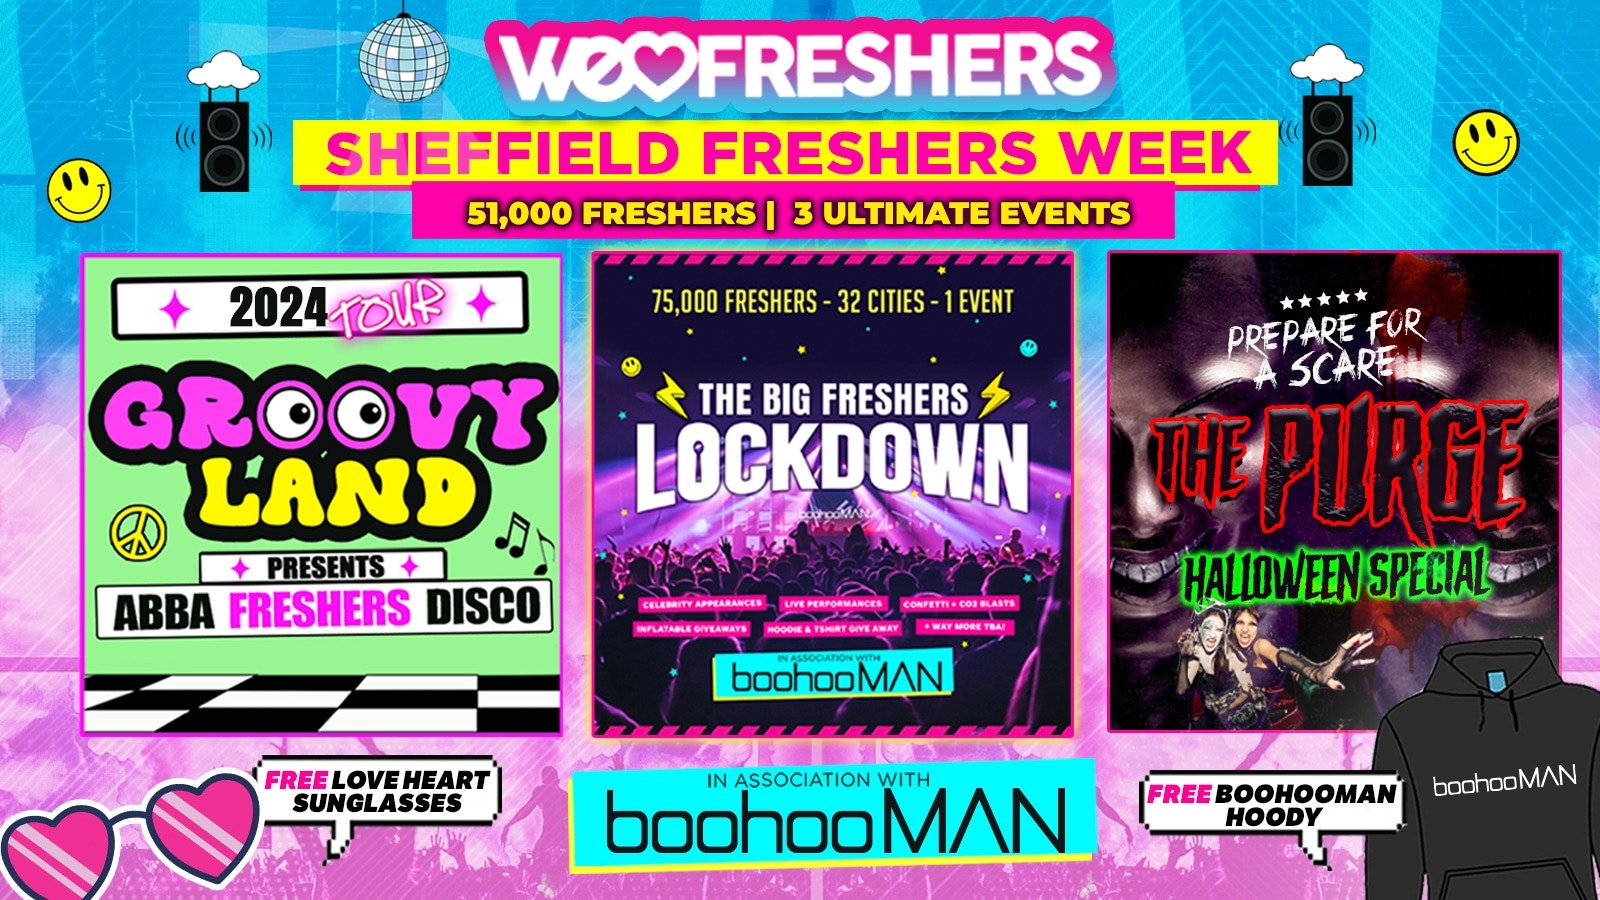 WE LOVE SHEFFIELD FRESHERS 2024 in association with boohooMAN ❗FREE BOOHOOMAN HOODIE TODAY ONLY❗